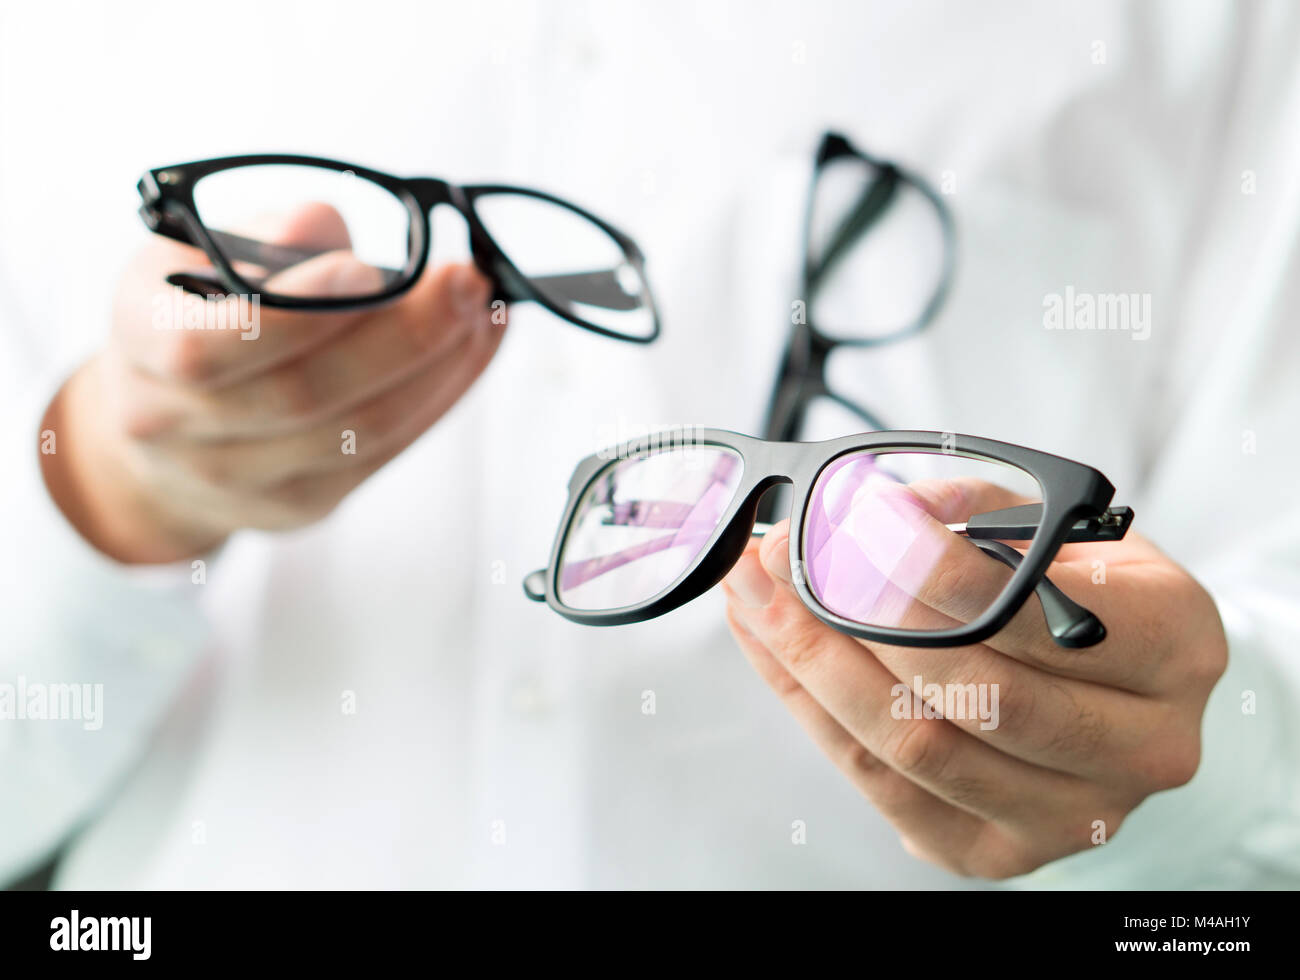 Optician comparing lenses or showing customer different options in spectacles. Eye doctor showing new glasses. Professional optometrist in white coat. Stock Photo